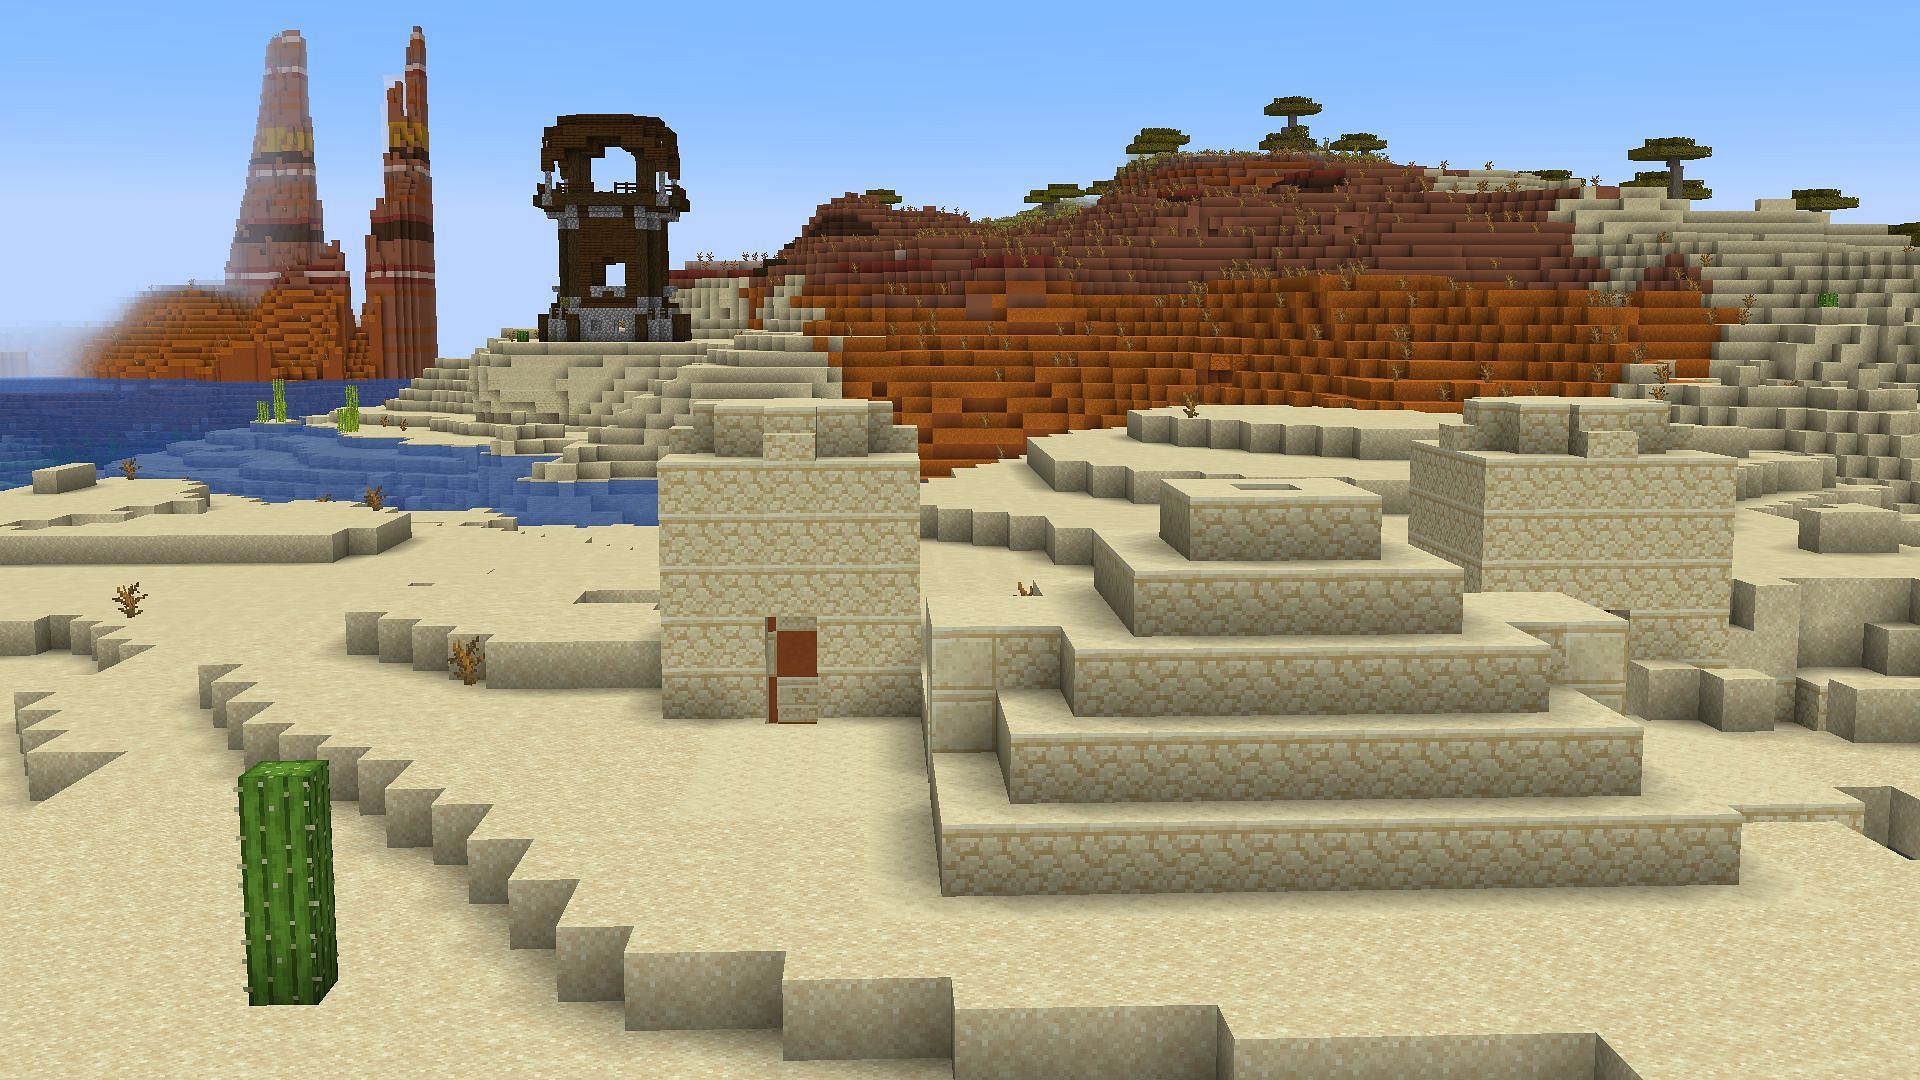 Desert Temple on a Minecraft island extremely close to mainland with Pillager Outpost (Image via Mojang)